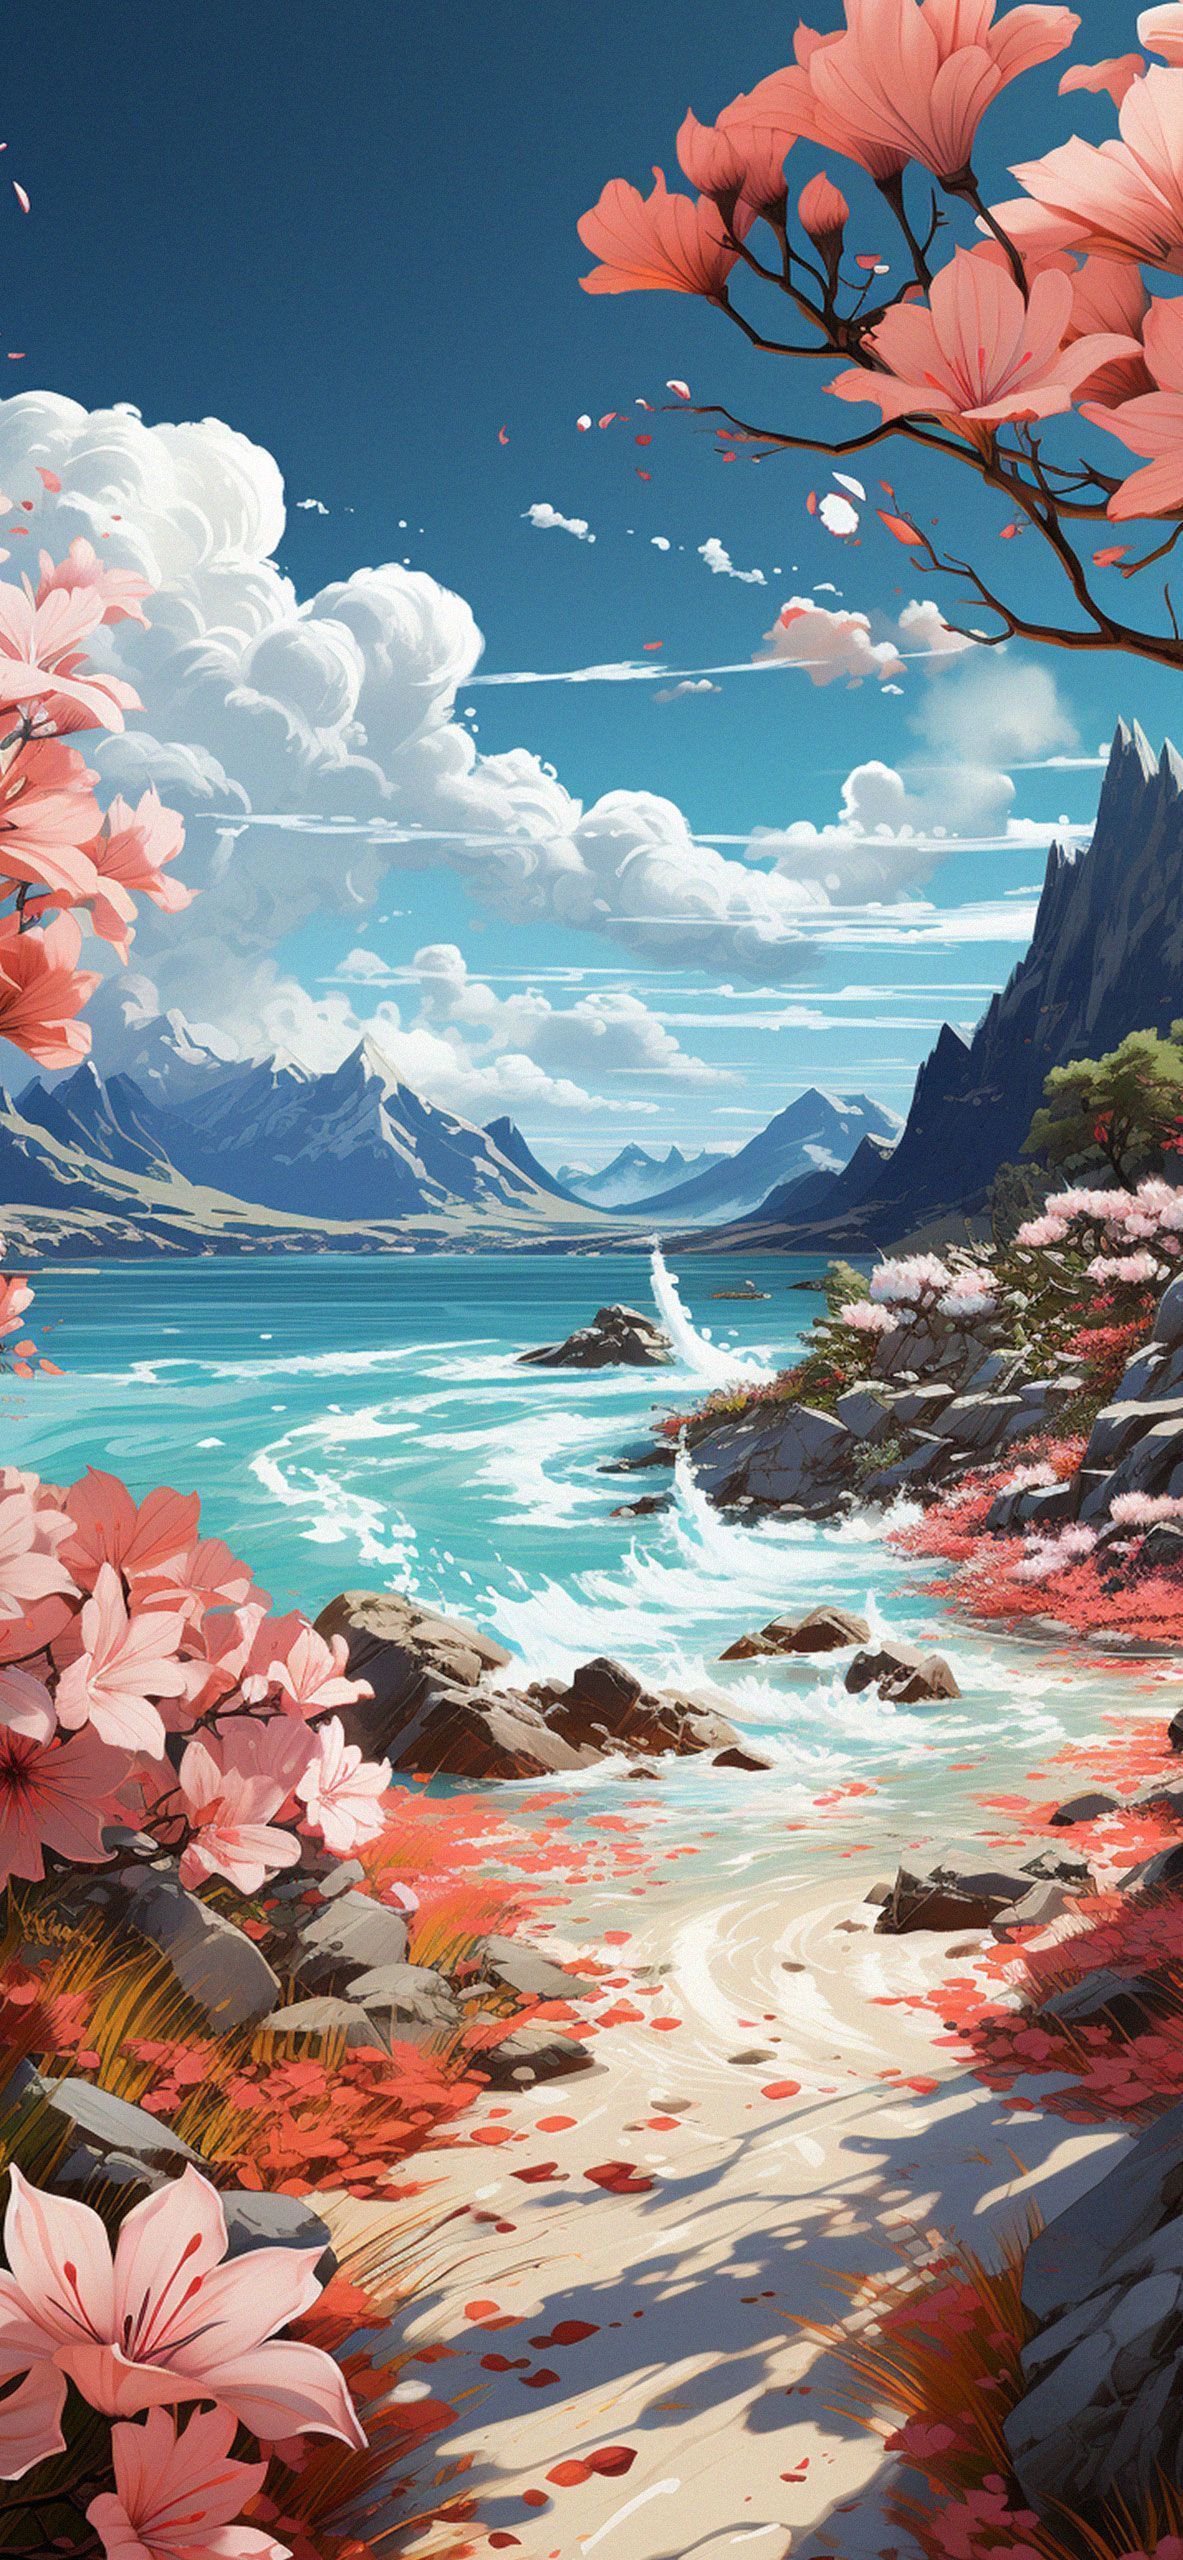 Aesthetic wallpaper phone, anime scenery, cherry blossoms, river, mountains, anime scenery, 1242x2688, 1080x2340, 2160x3840 - Summer